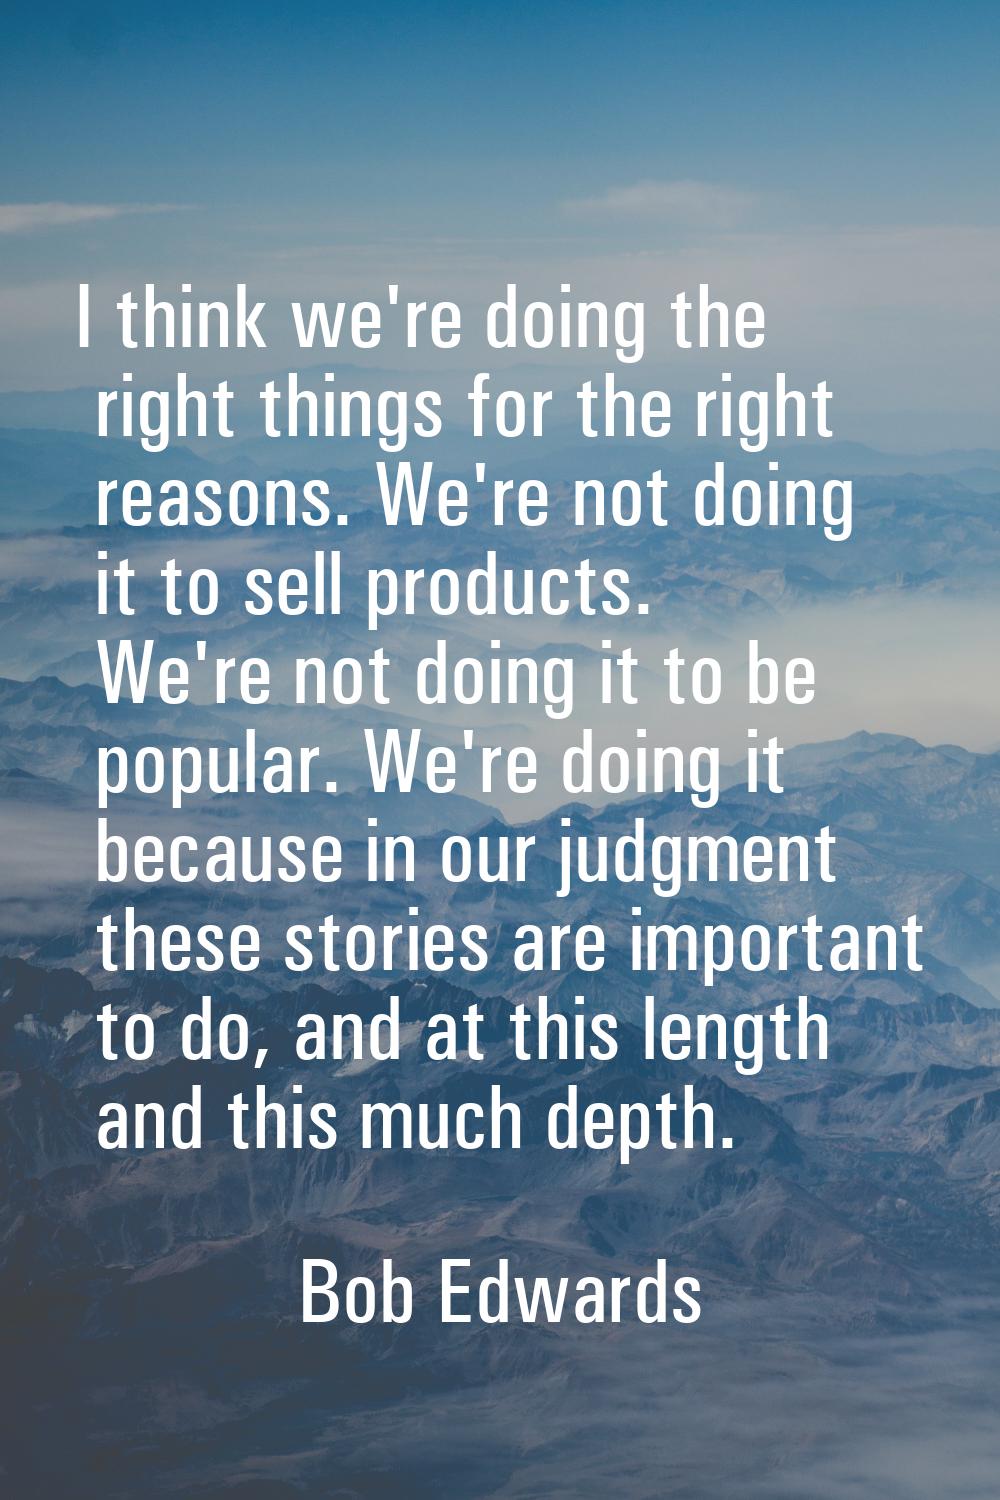 I think we're doing the right things for the right reasons. We're not doing it to sell products. We